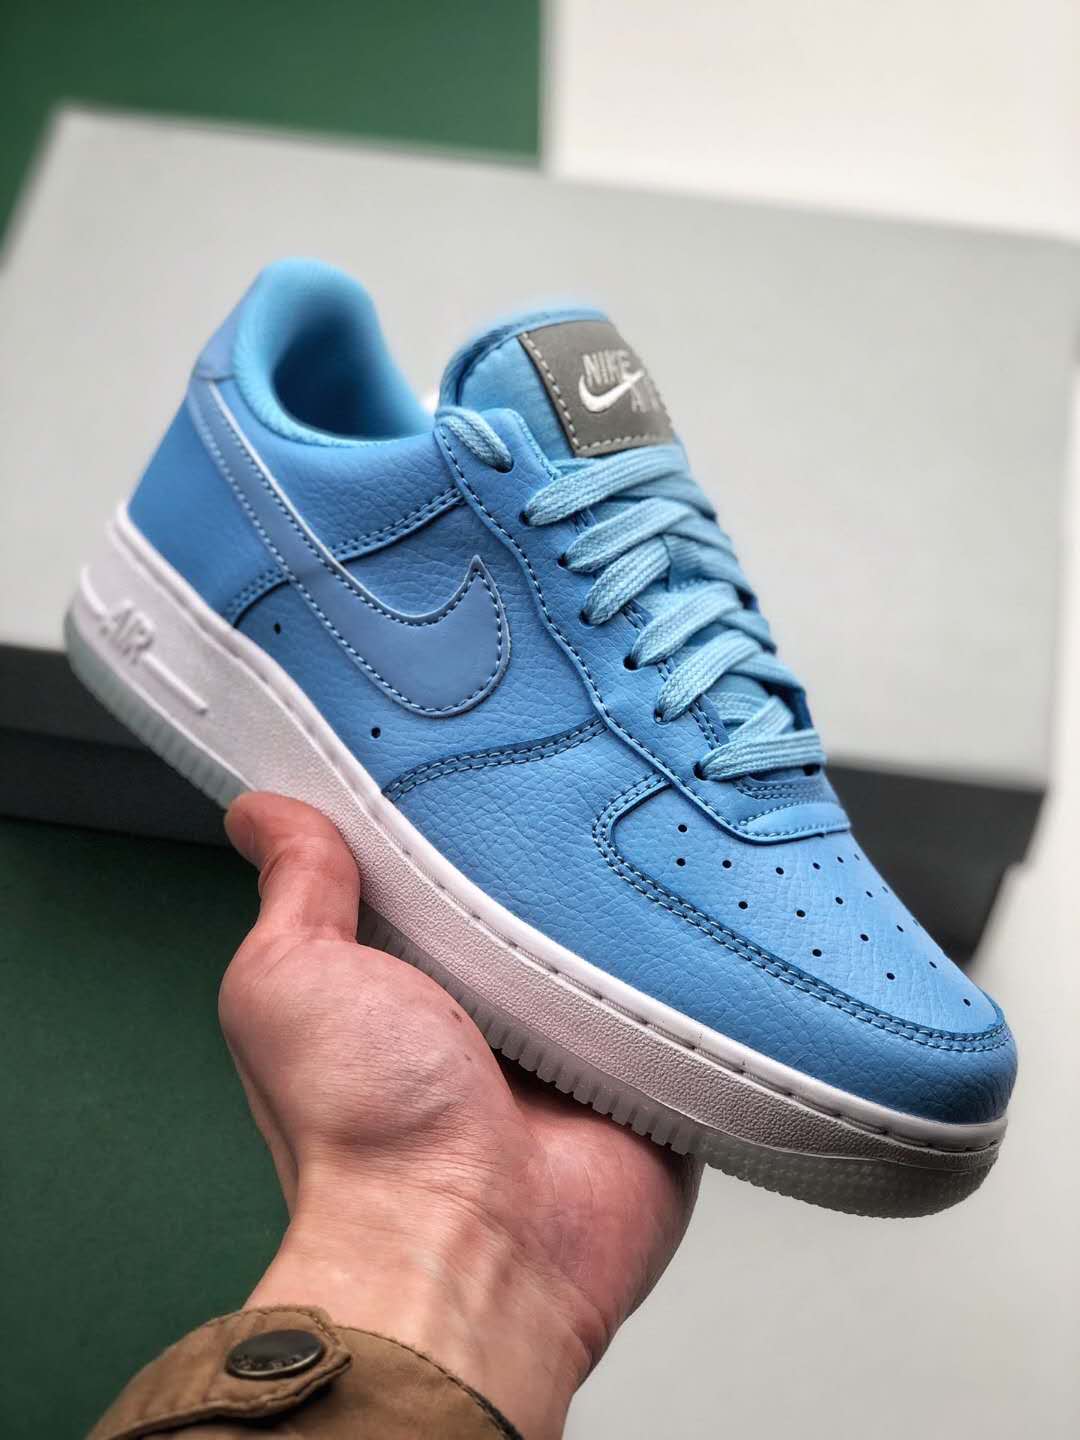 Nike Air Force 1 '07 Essential 'Blue White' AO2132-400 - Stylish and Versatile Sneakers!